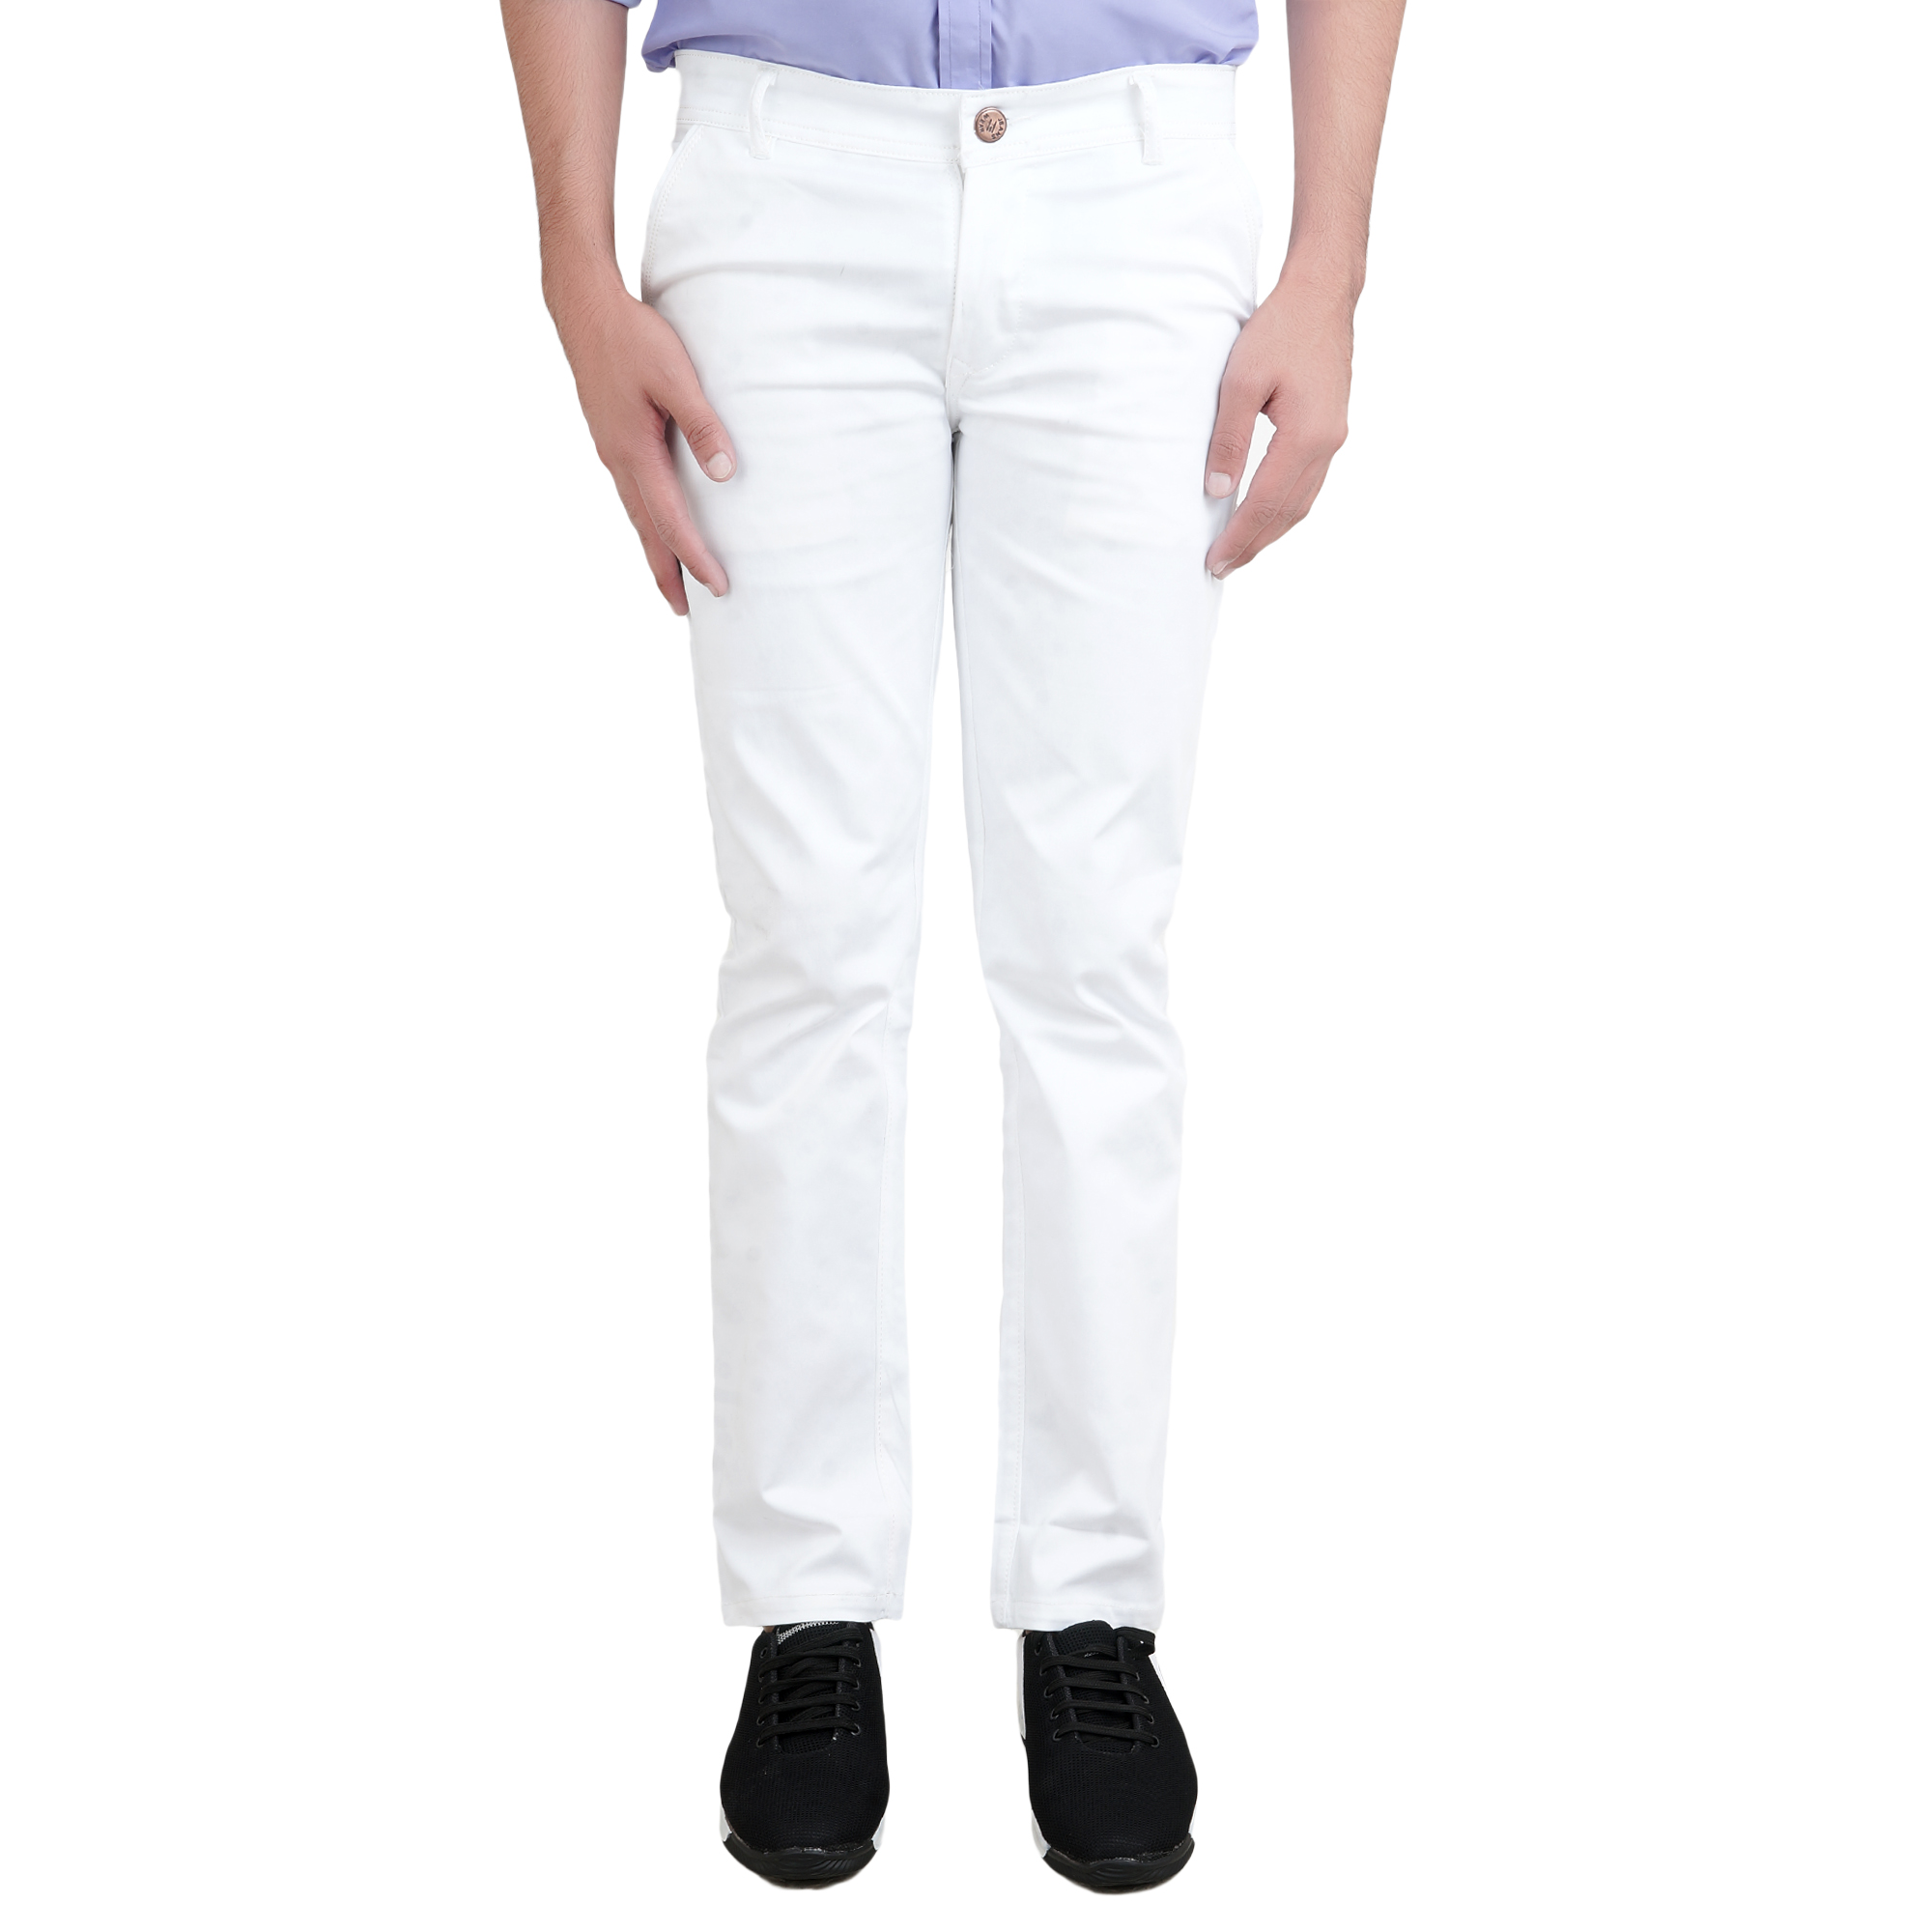 Buy FIOL SOLID WHITE MEN'S JEANS Online @ ₹499 from ShopClues